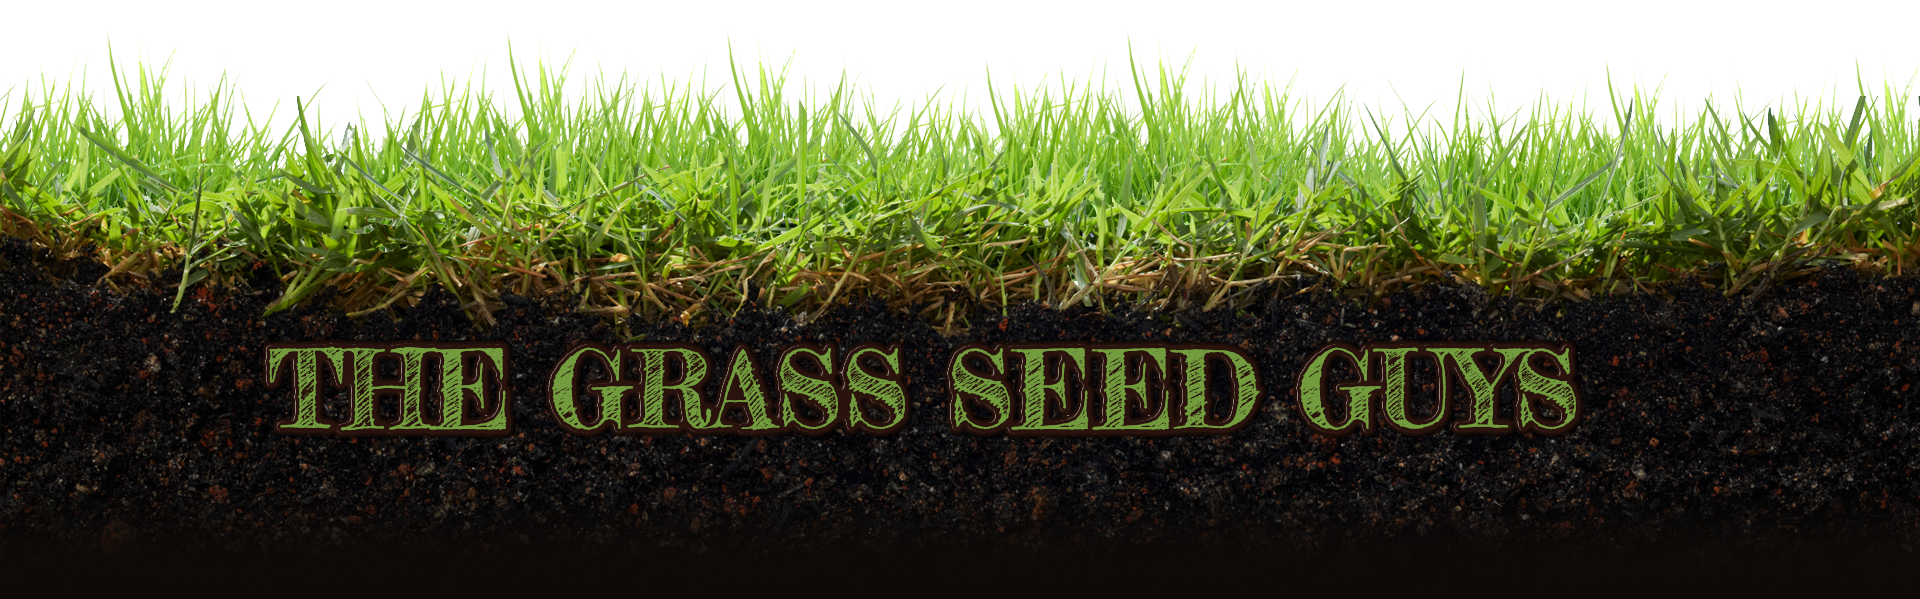 Grass clipart ryegrass. Utah seed reclamation for